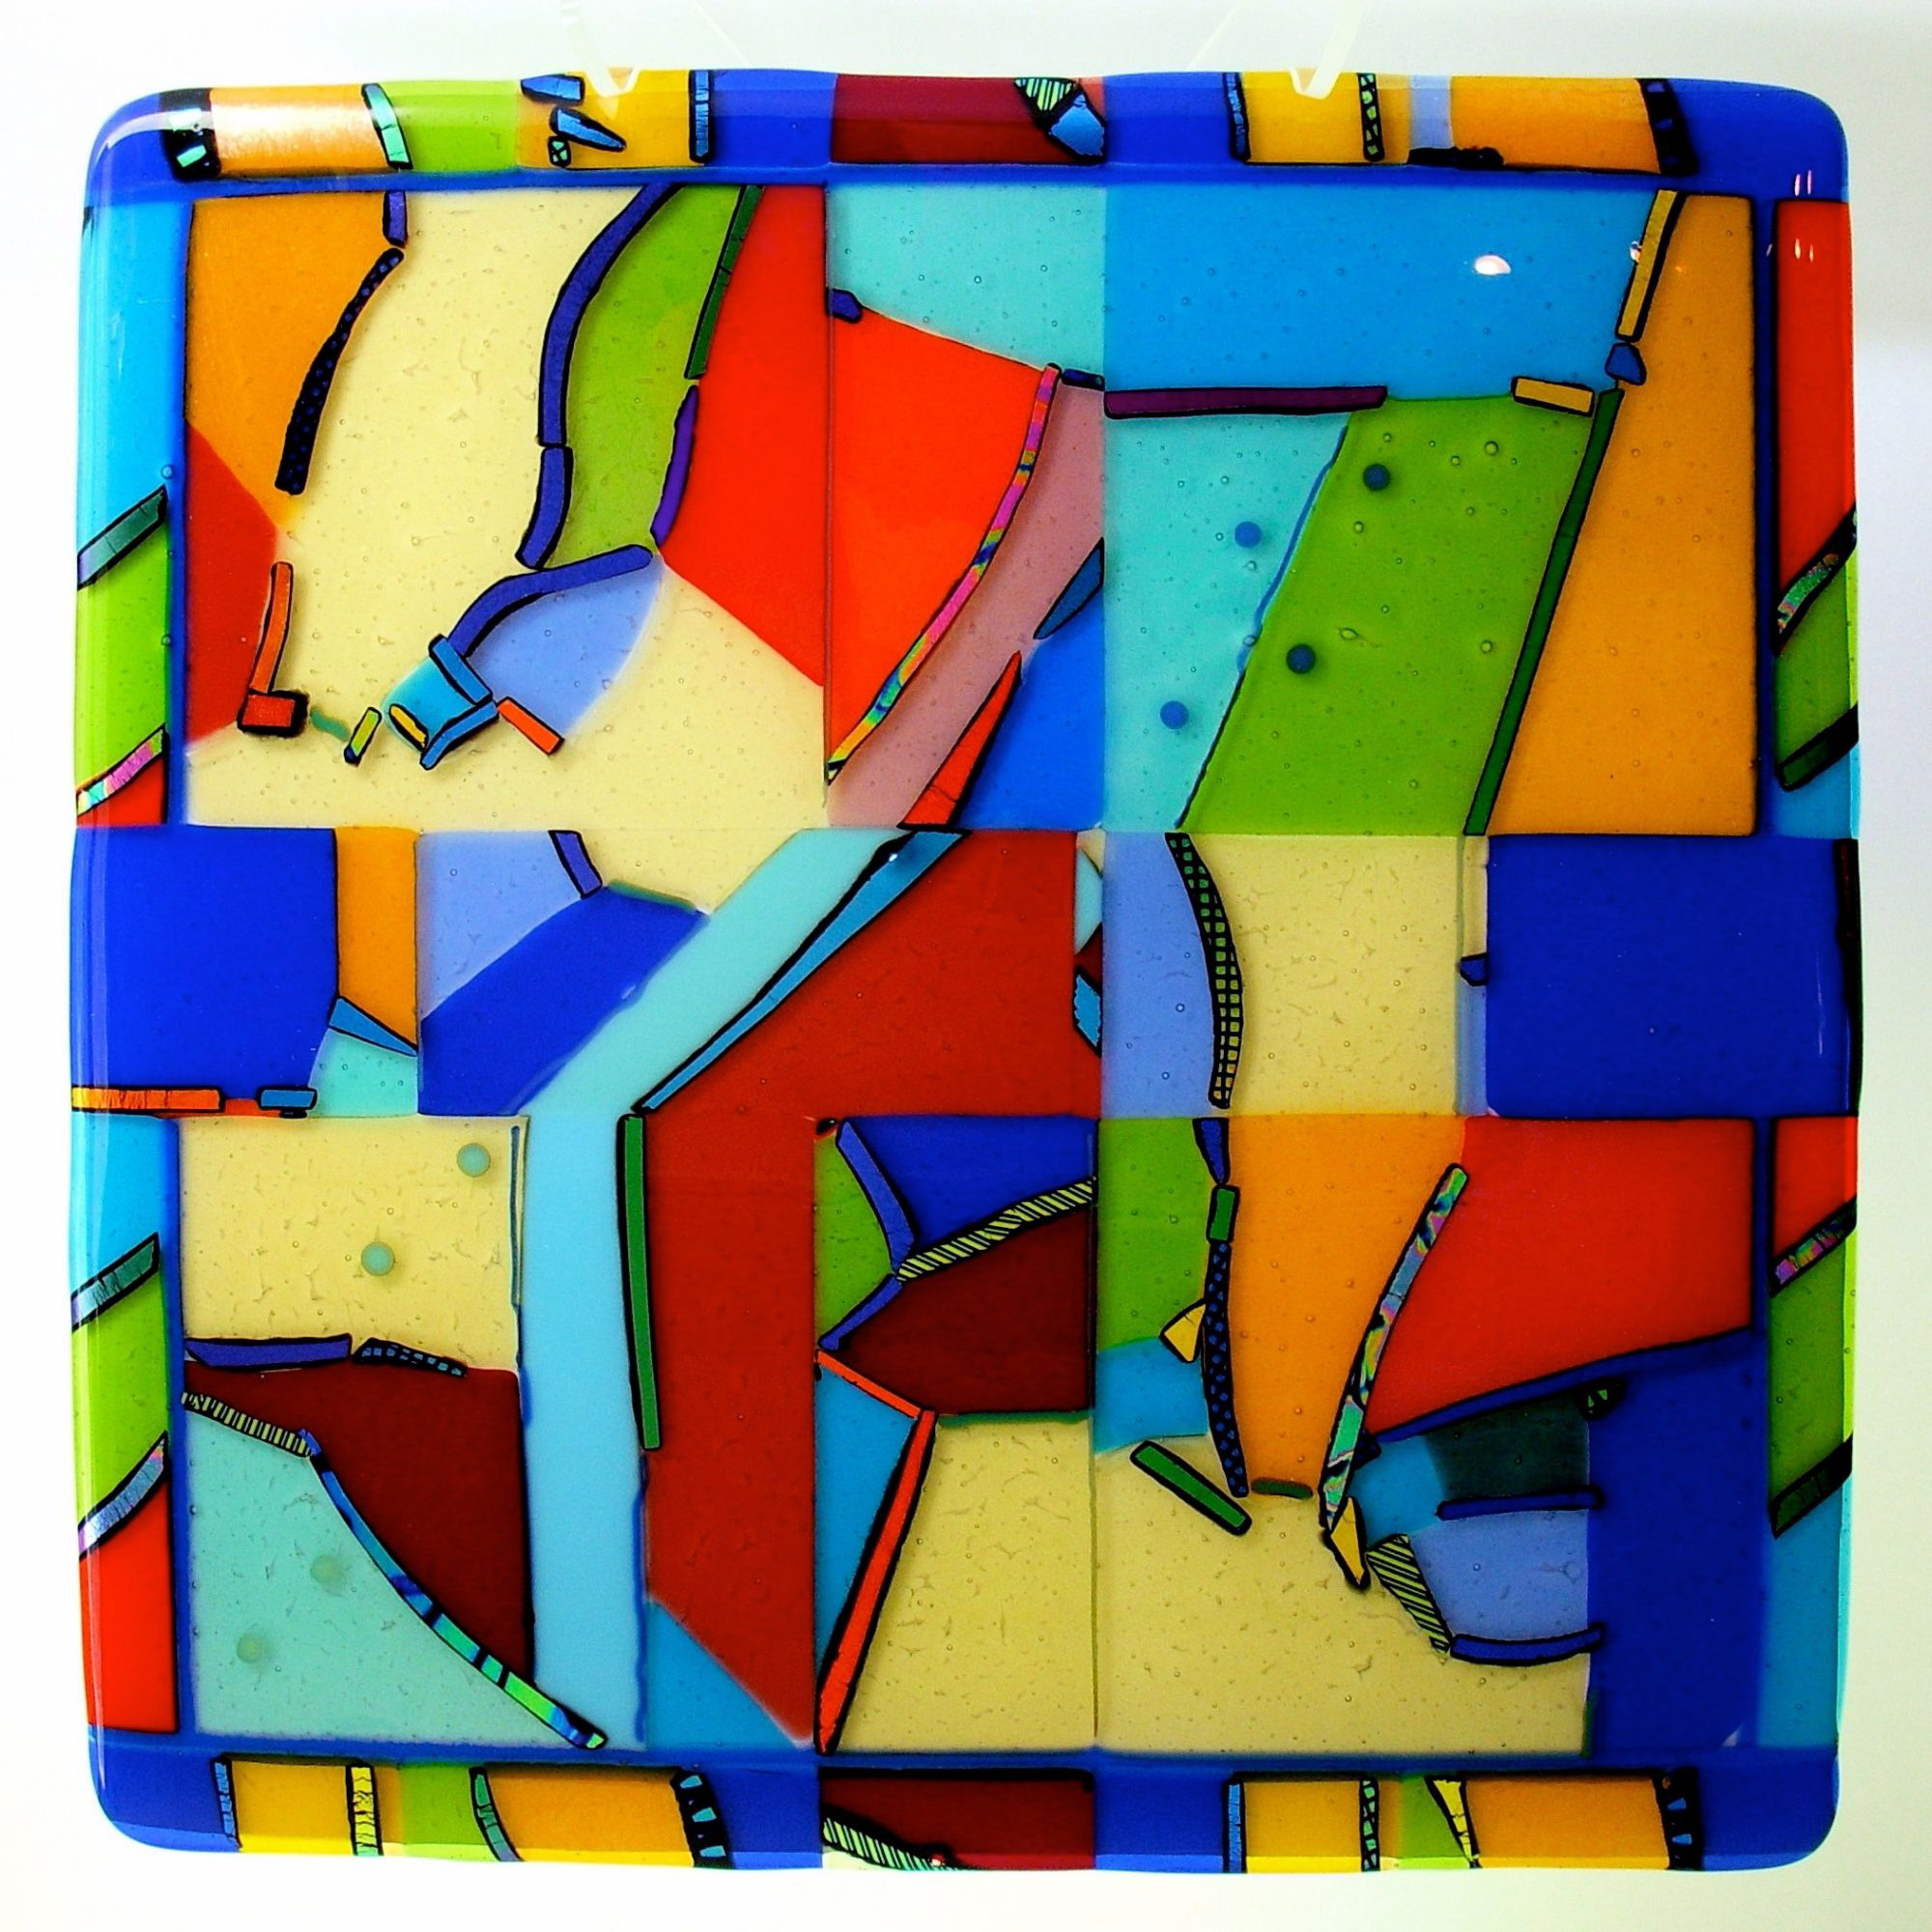 judeglass wall piece cast fused glass art colorful